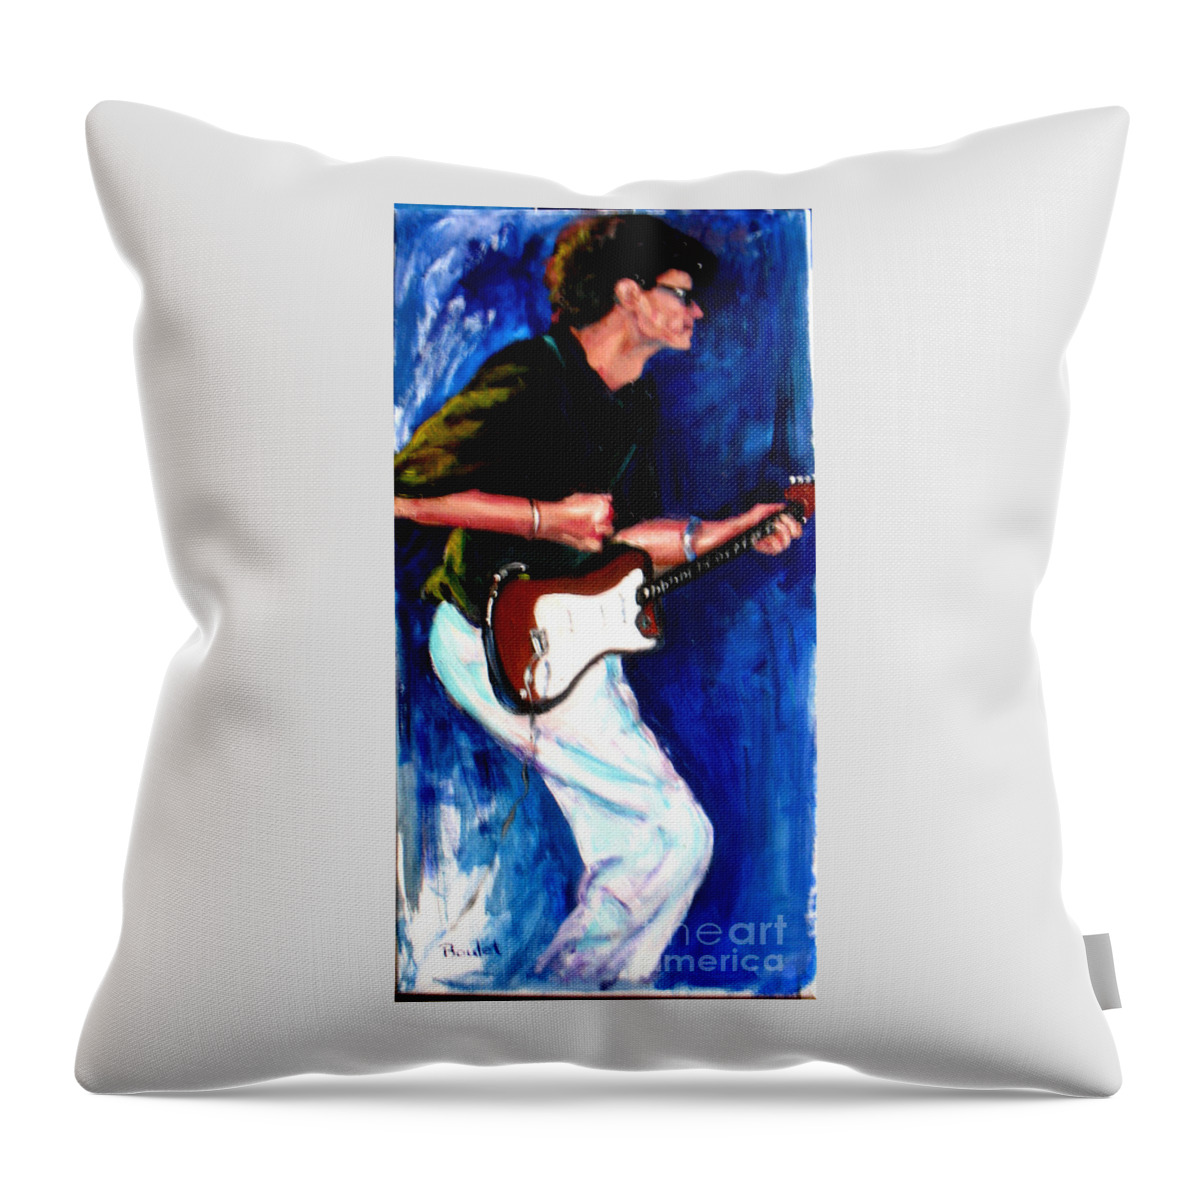 New Orleans Throw Pillow featuring the painting David on Guitar by Beverly Boulet